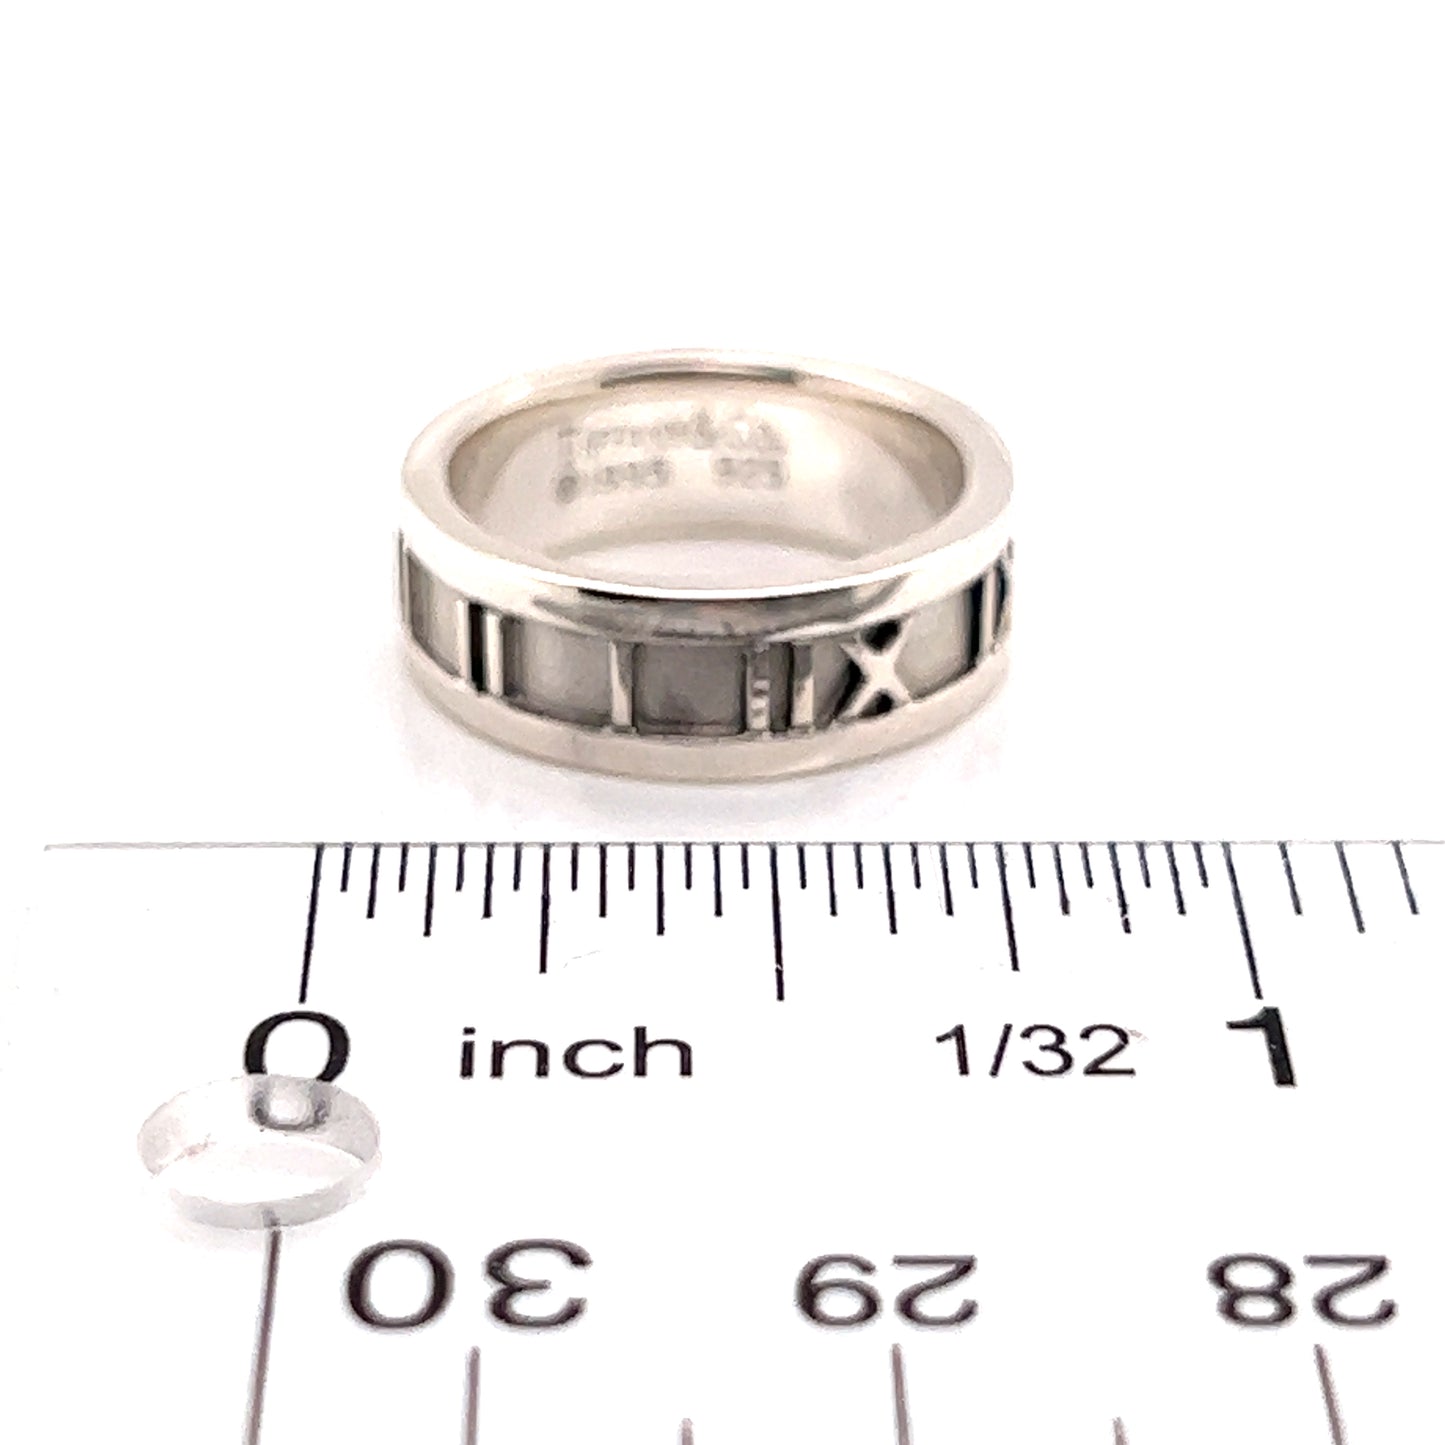 Tiffany & Co Estate Sterling Silver Ring Size 4.25, 5.2 Grams TIF182 - Certified Estate Jewelry